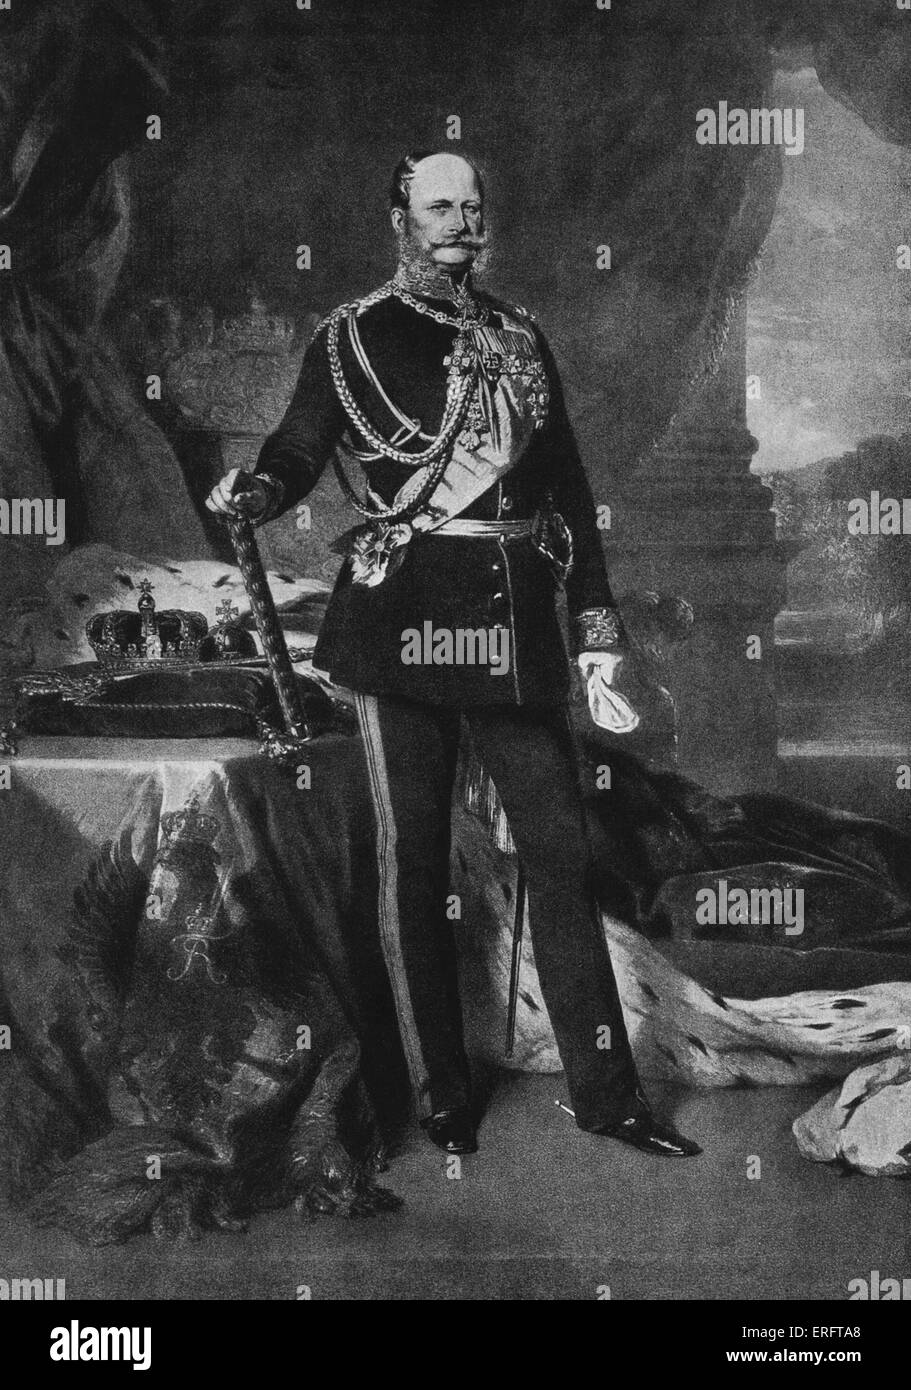 William I of Prussia (also known as William the Great) - after a painting by Franz Xaver Winterhalter. King of Prussia & first Stock Photo